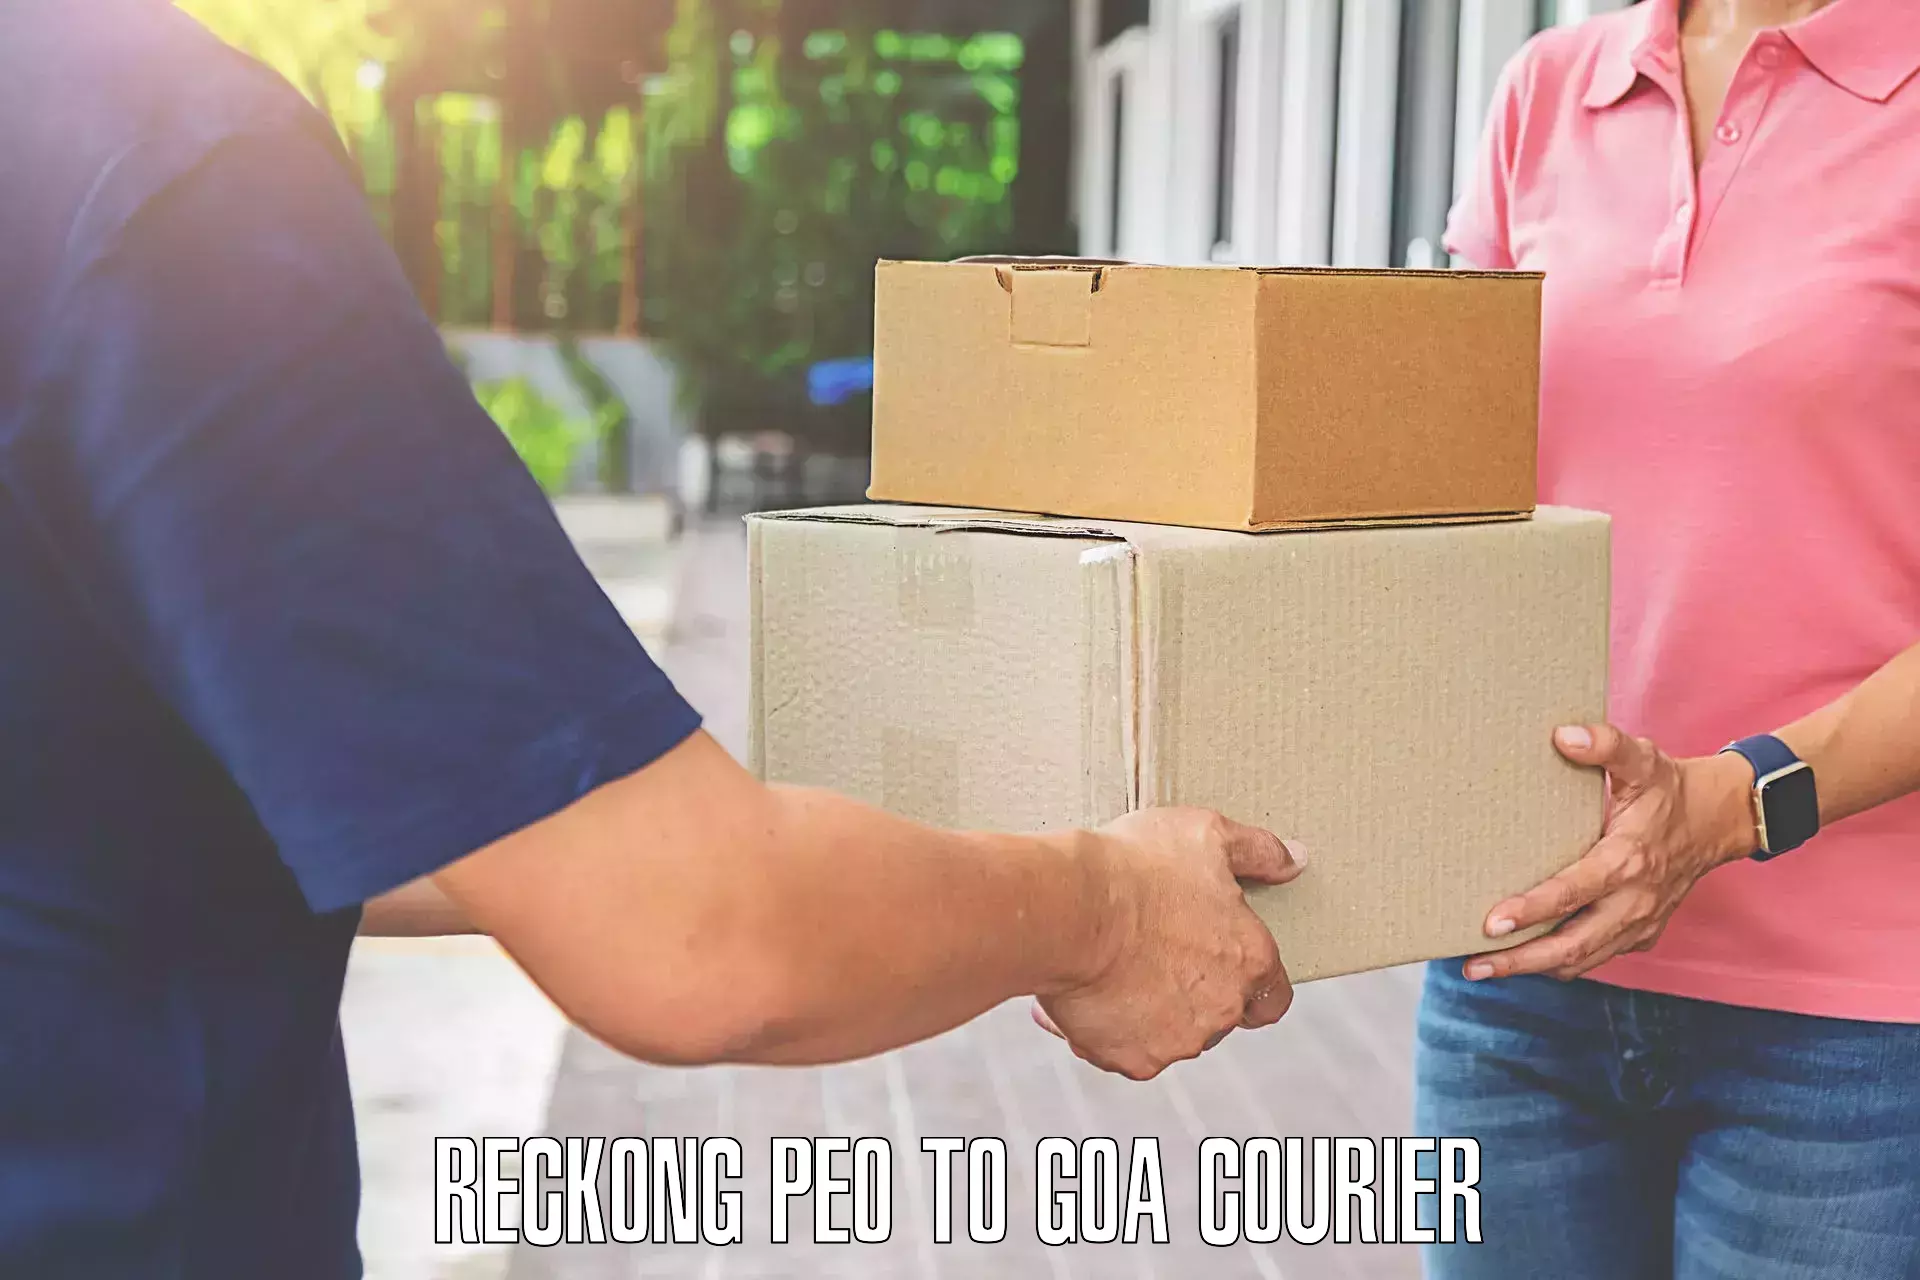 Express luggage delivery Reckong Peo to Goa